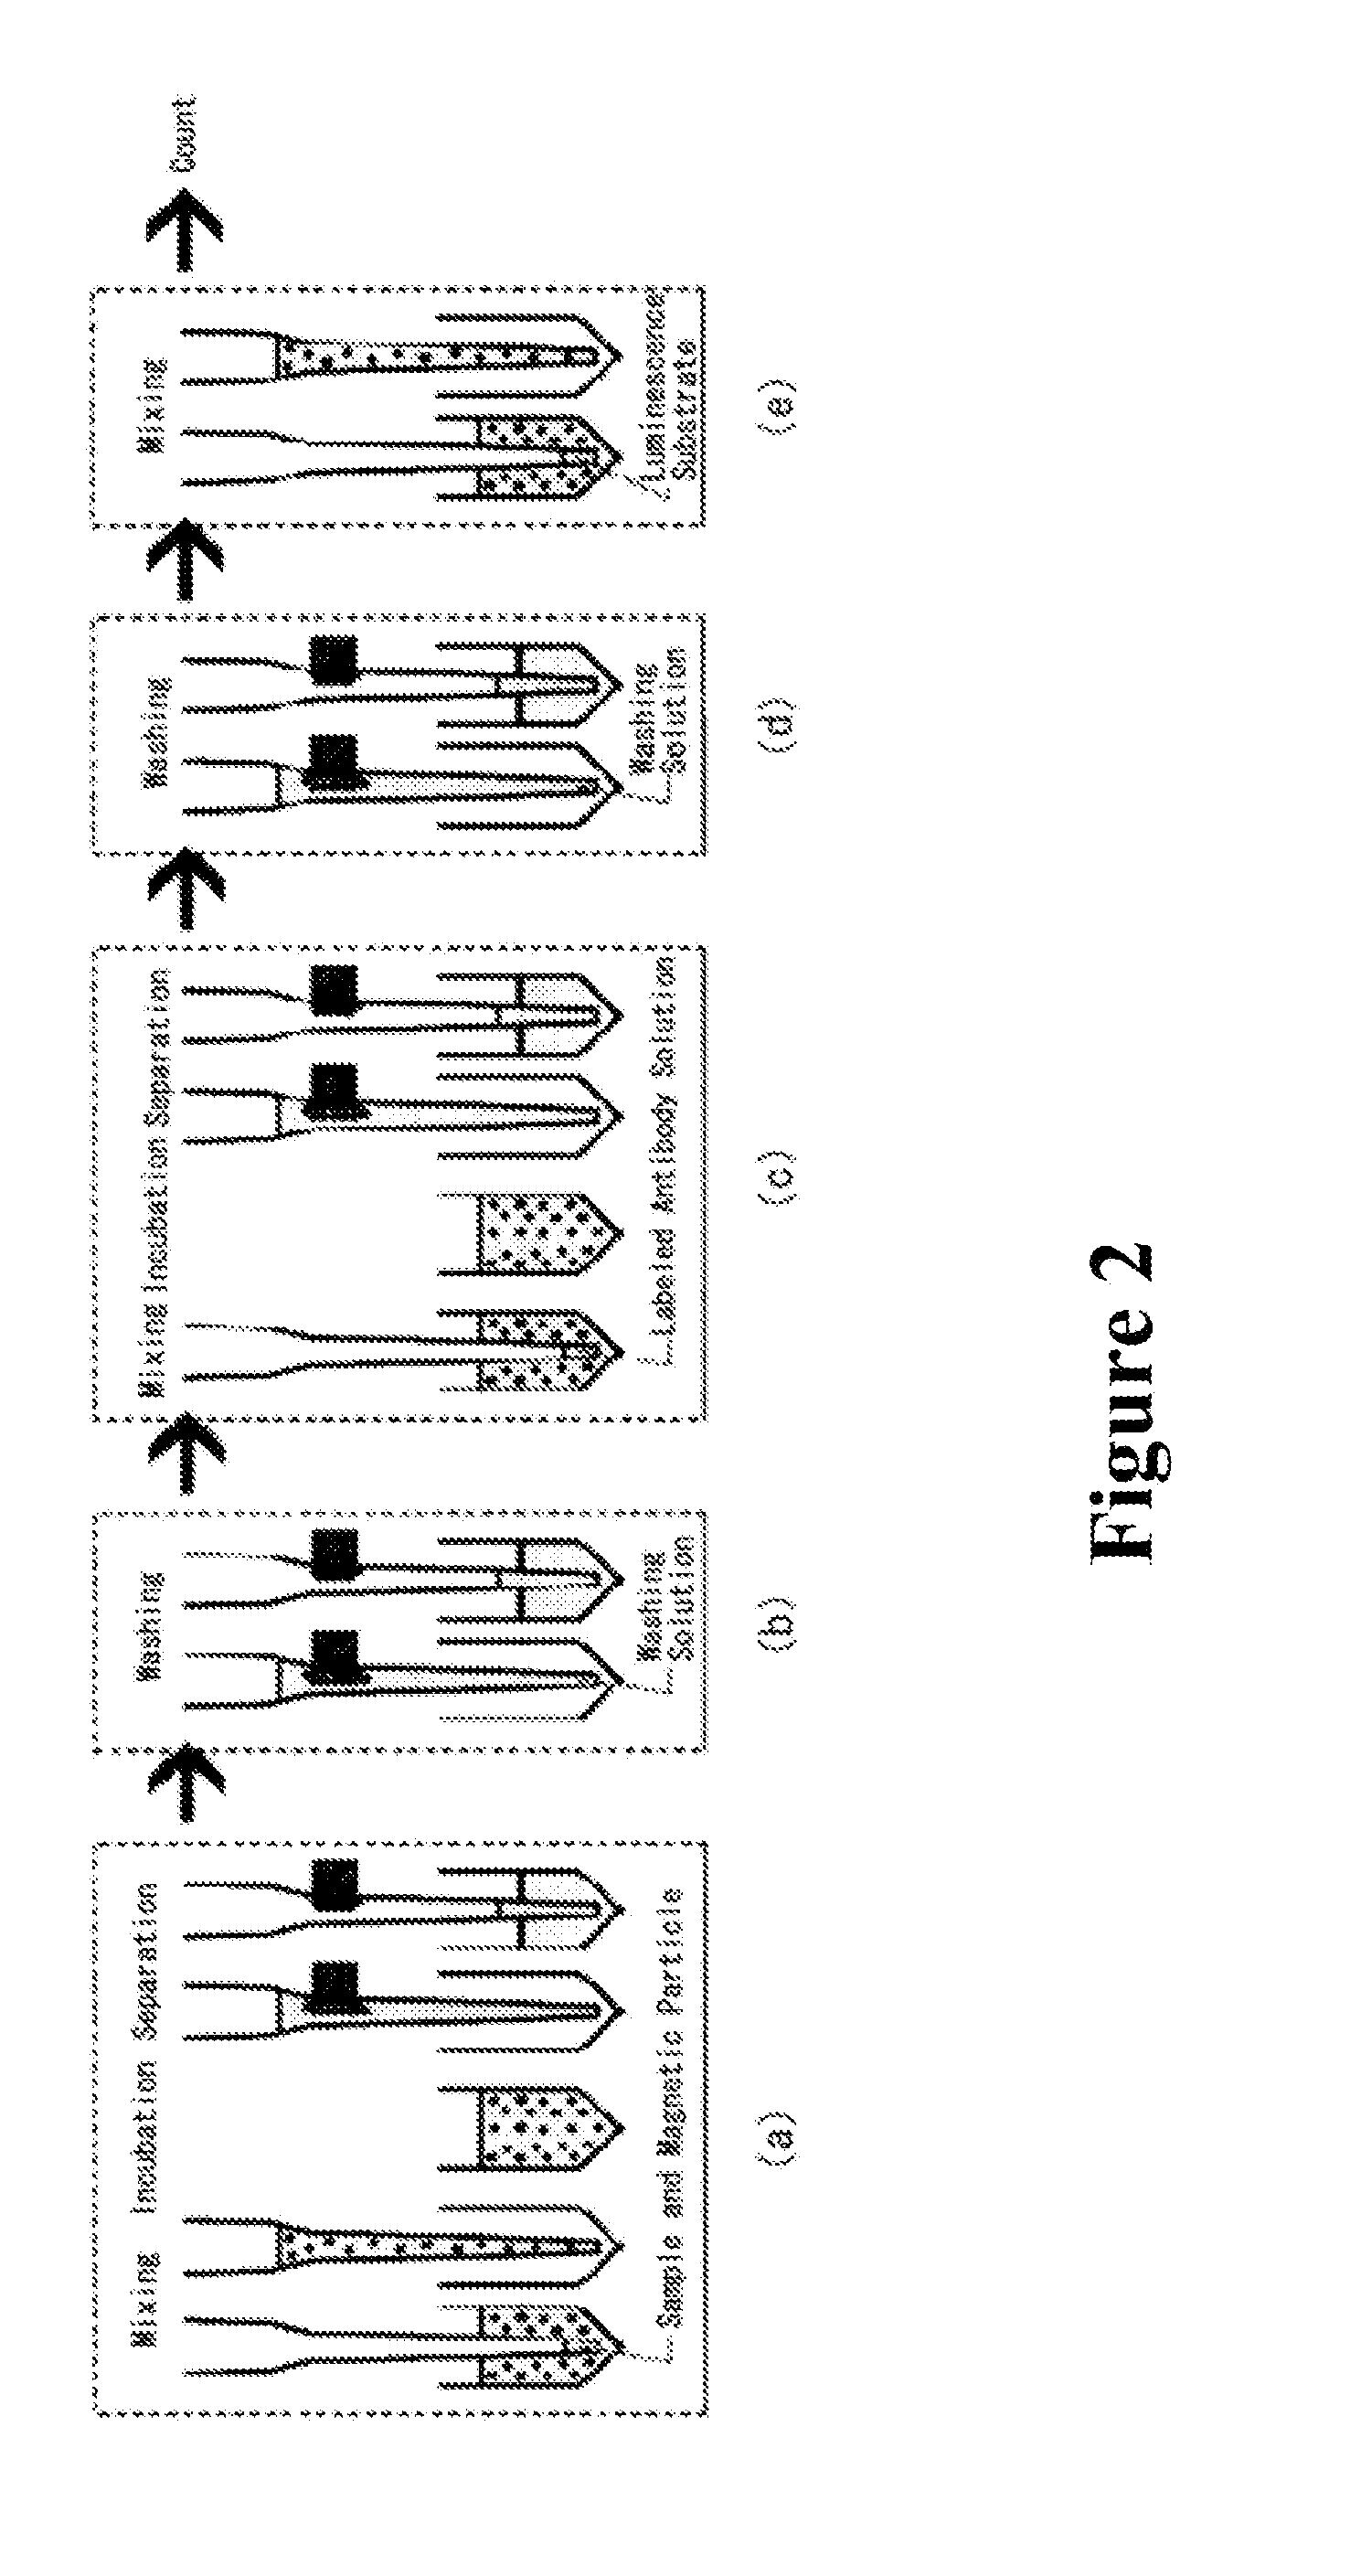 Method for automatic determination of sample